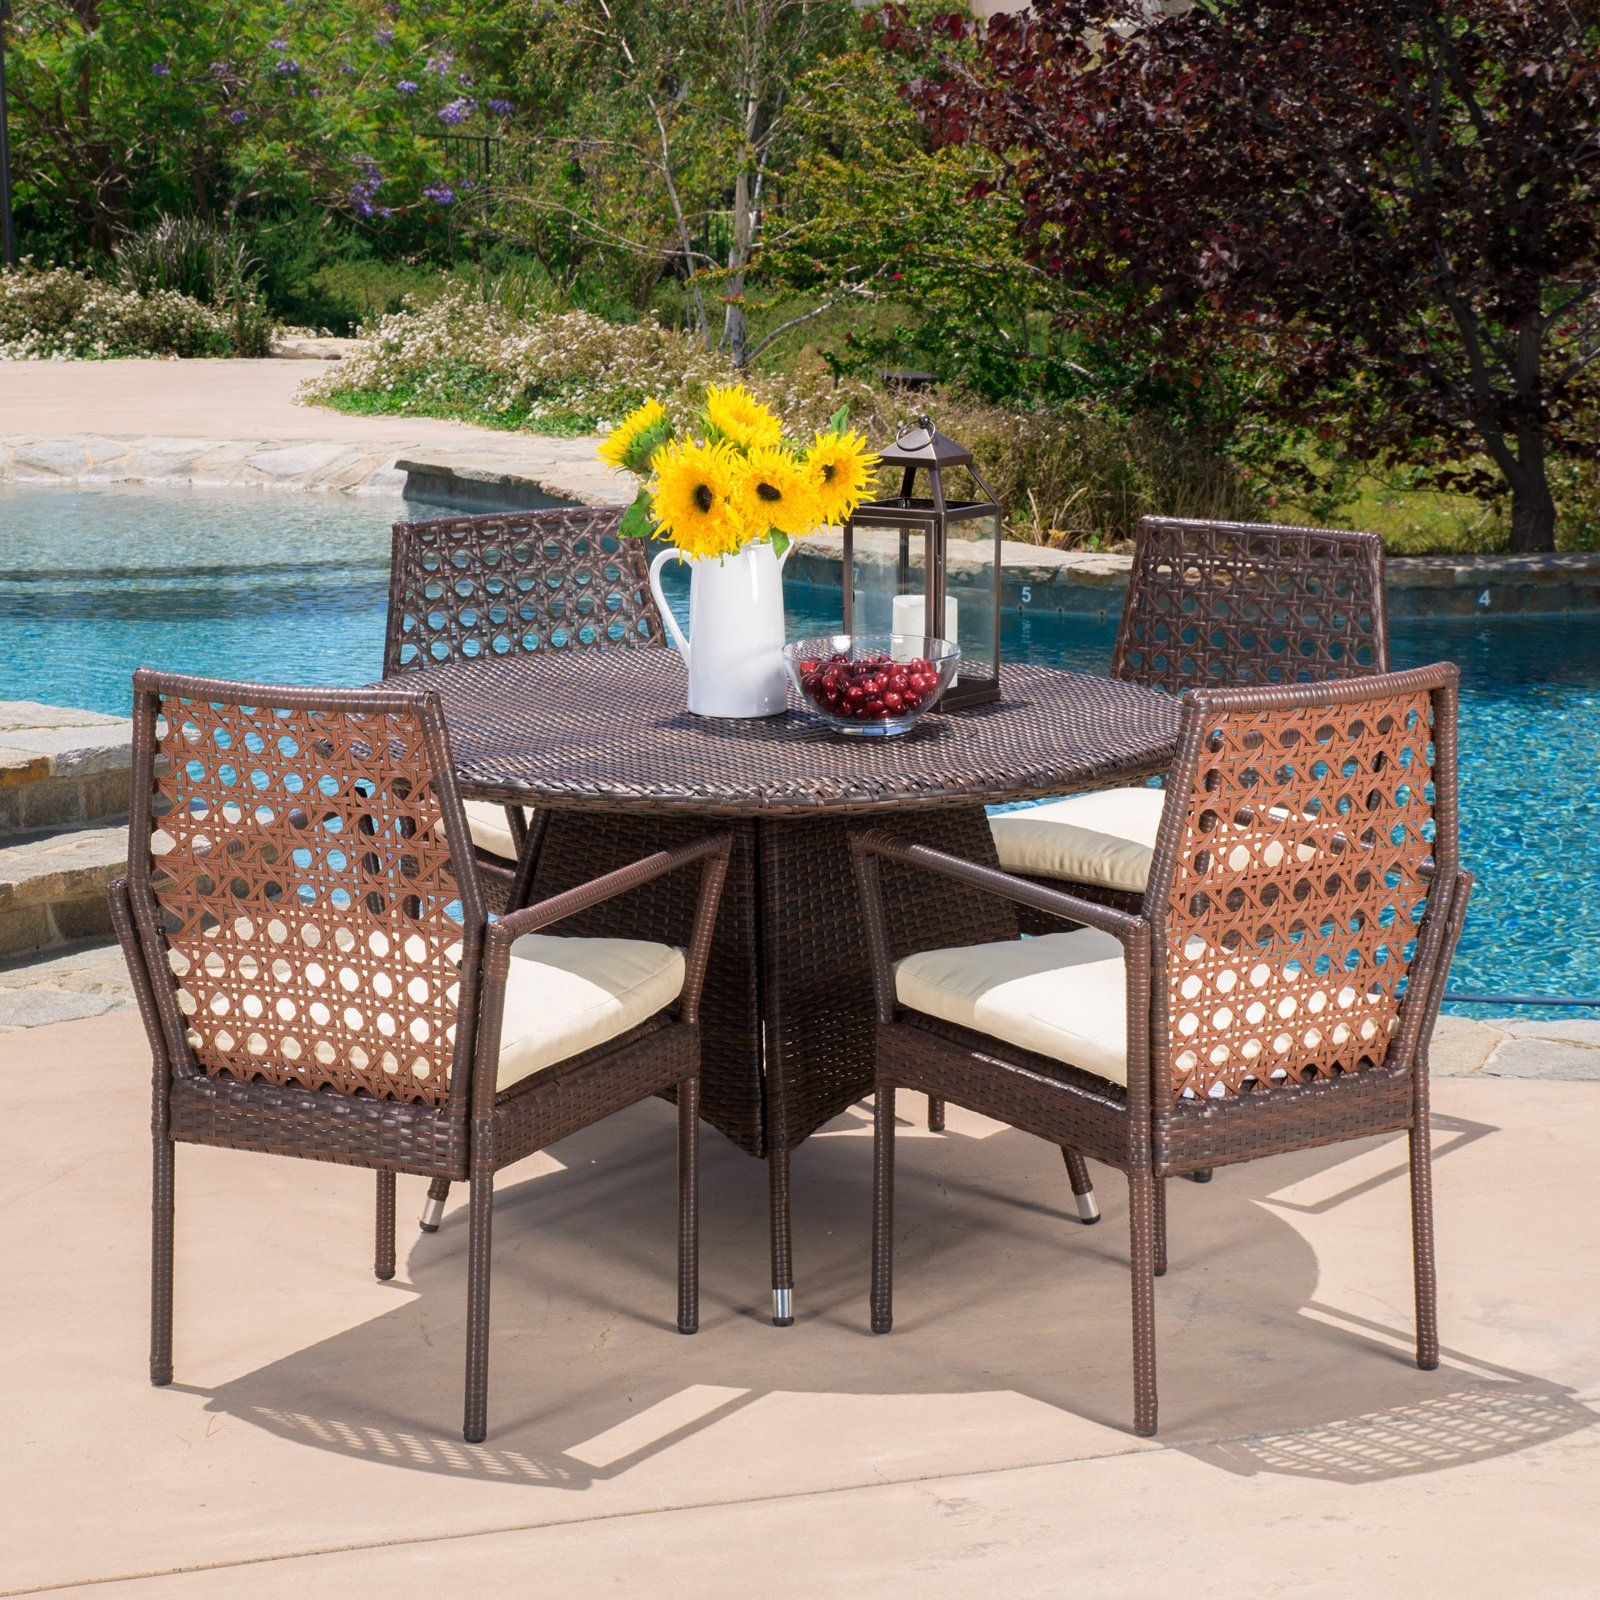 Claire Wicker 5 Piece Round Patio Dining Set With Cushion – Walmart Intended For Patio Dining Sets With Cushions (View 5 of 15)